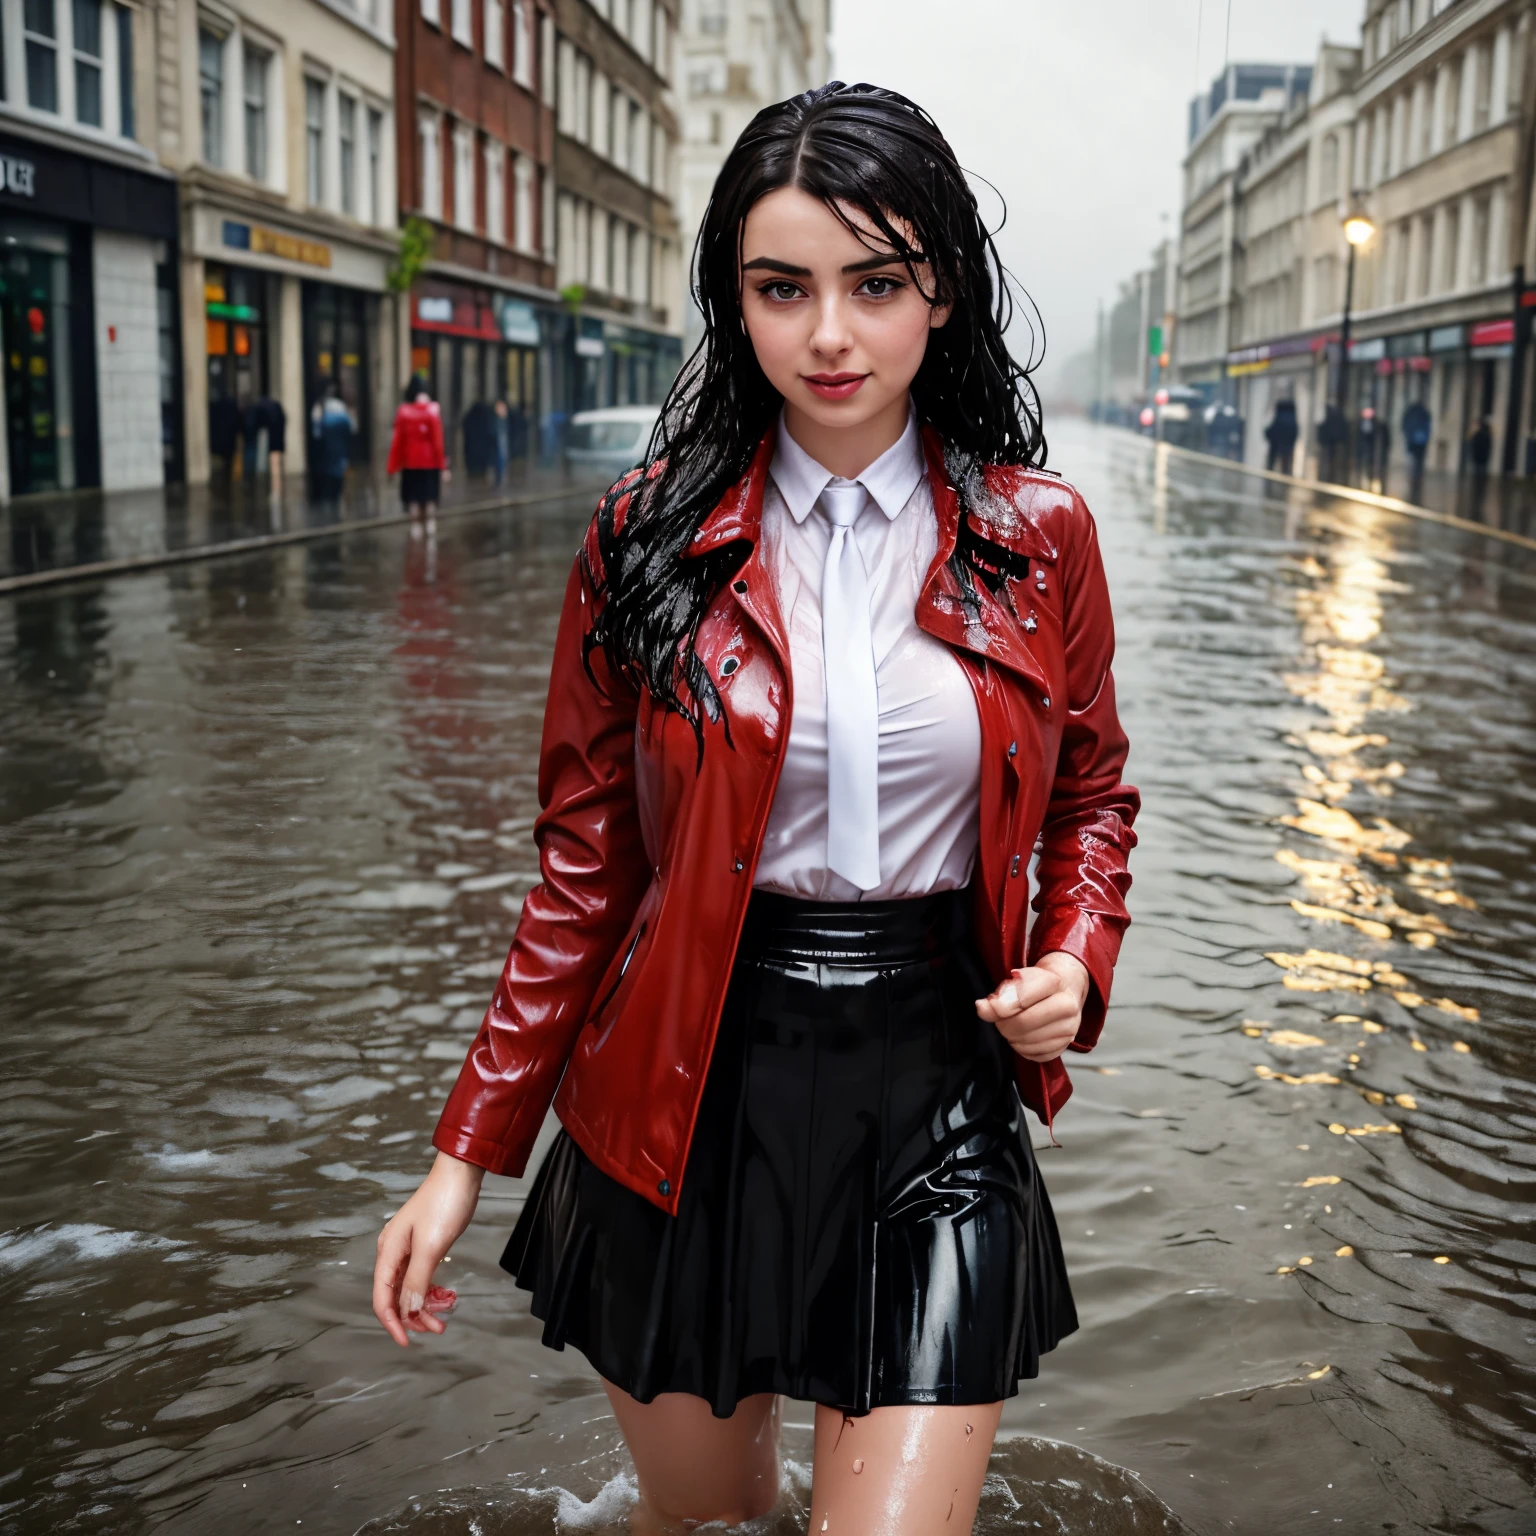 woman in a red leather jacket and skirt standing in the water, wet look, she is wearing a wet coat, on a wet london street, pretty girl standing in the rain, dressed as , charli bowater, wearing jacket and skirt, wearing atsuko kudo latex outfit, soaked, charli xcx, wet streets, wearing red jacket, grin, shirt and tie, soaked, drenched, wet clothes, dripping wet, dripping oil, wet hair